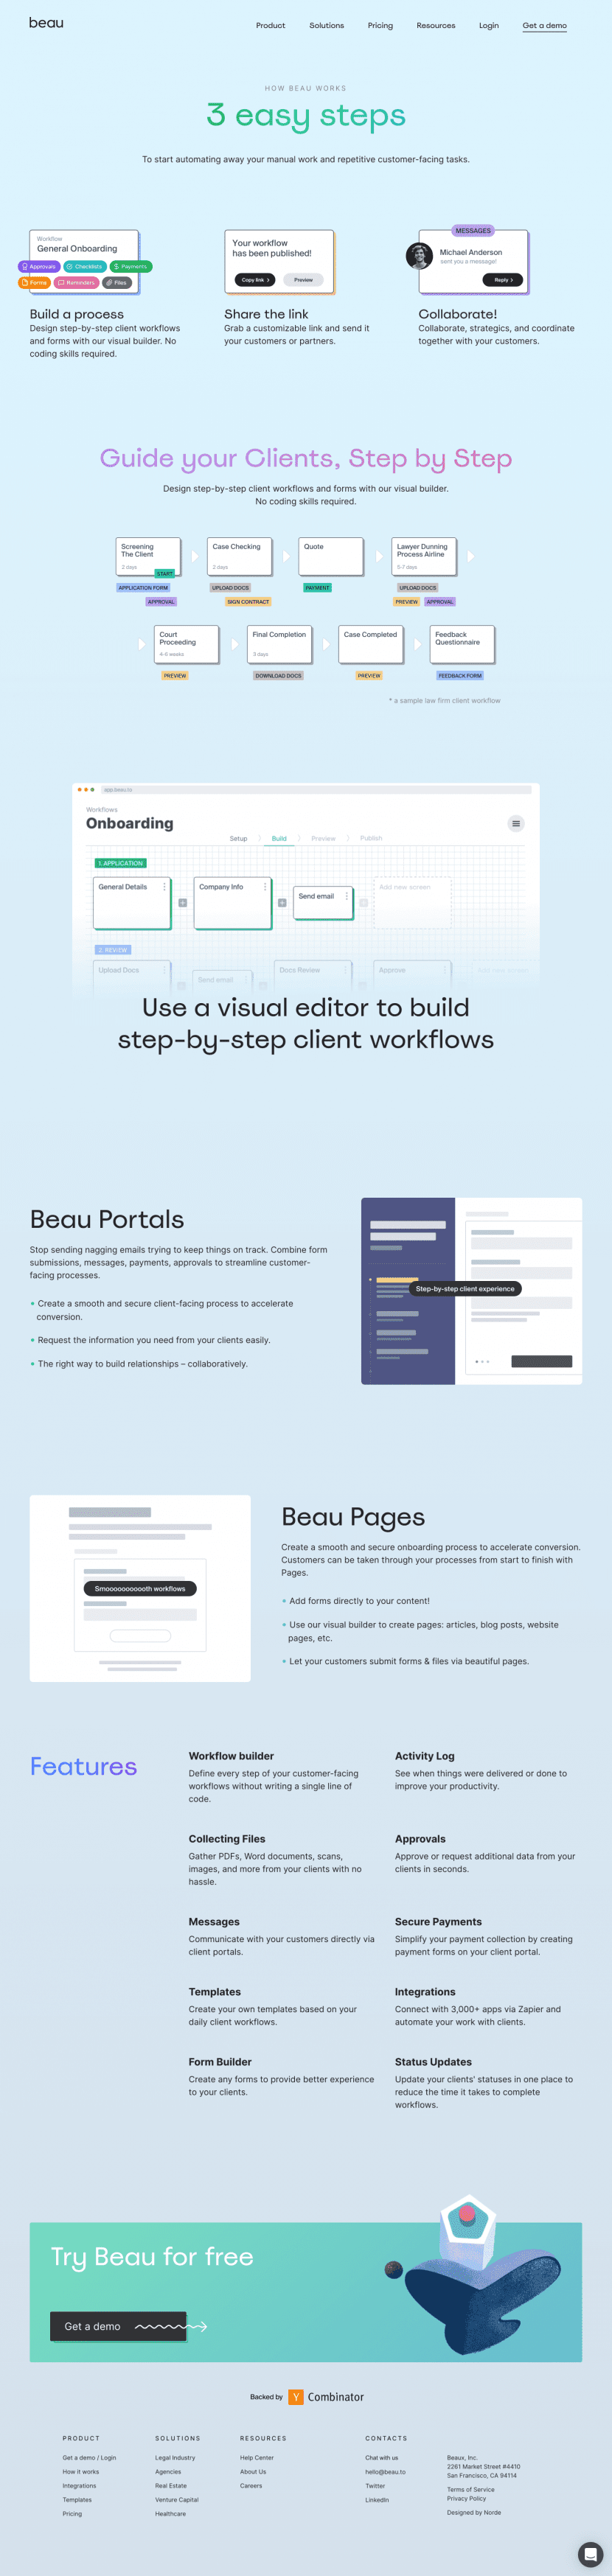 beau-features-page